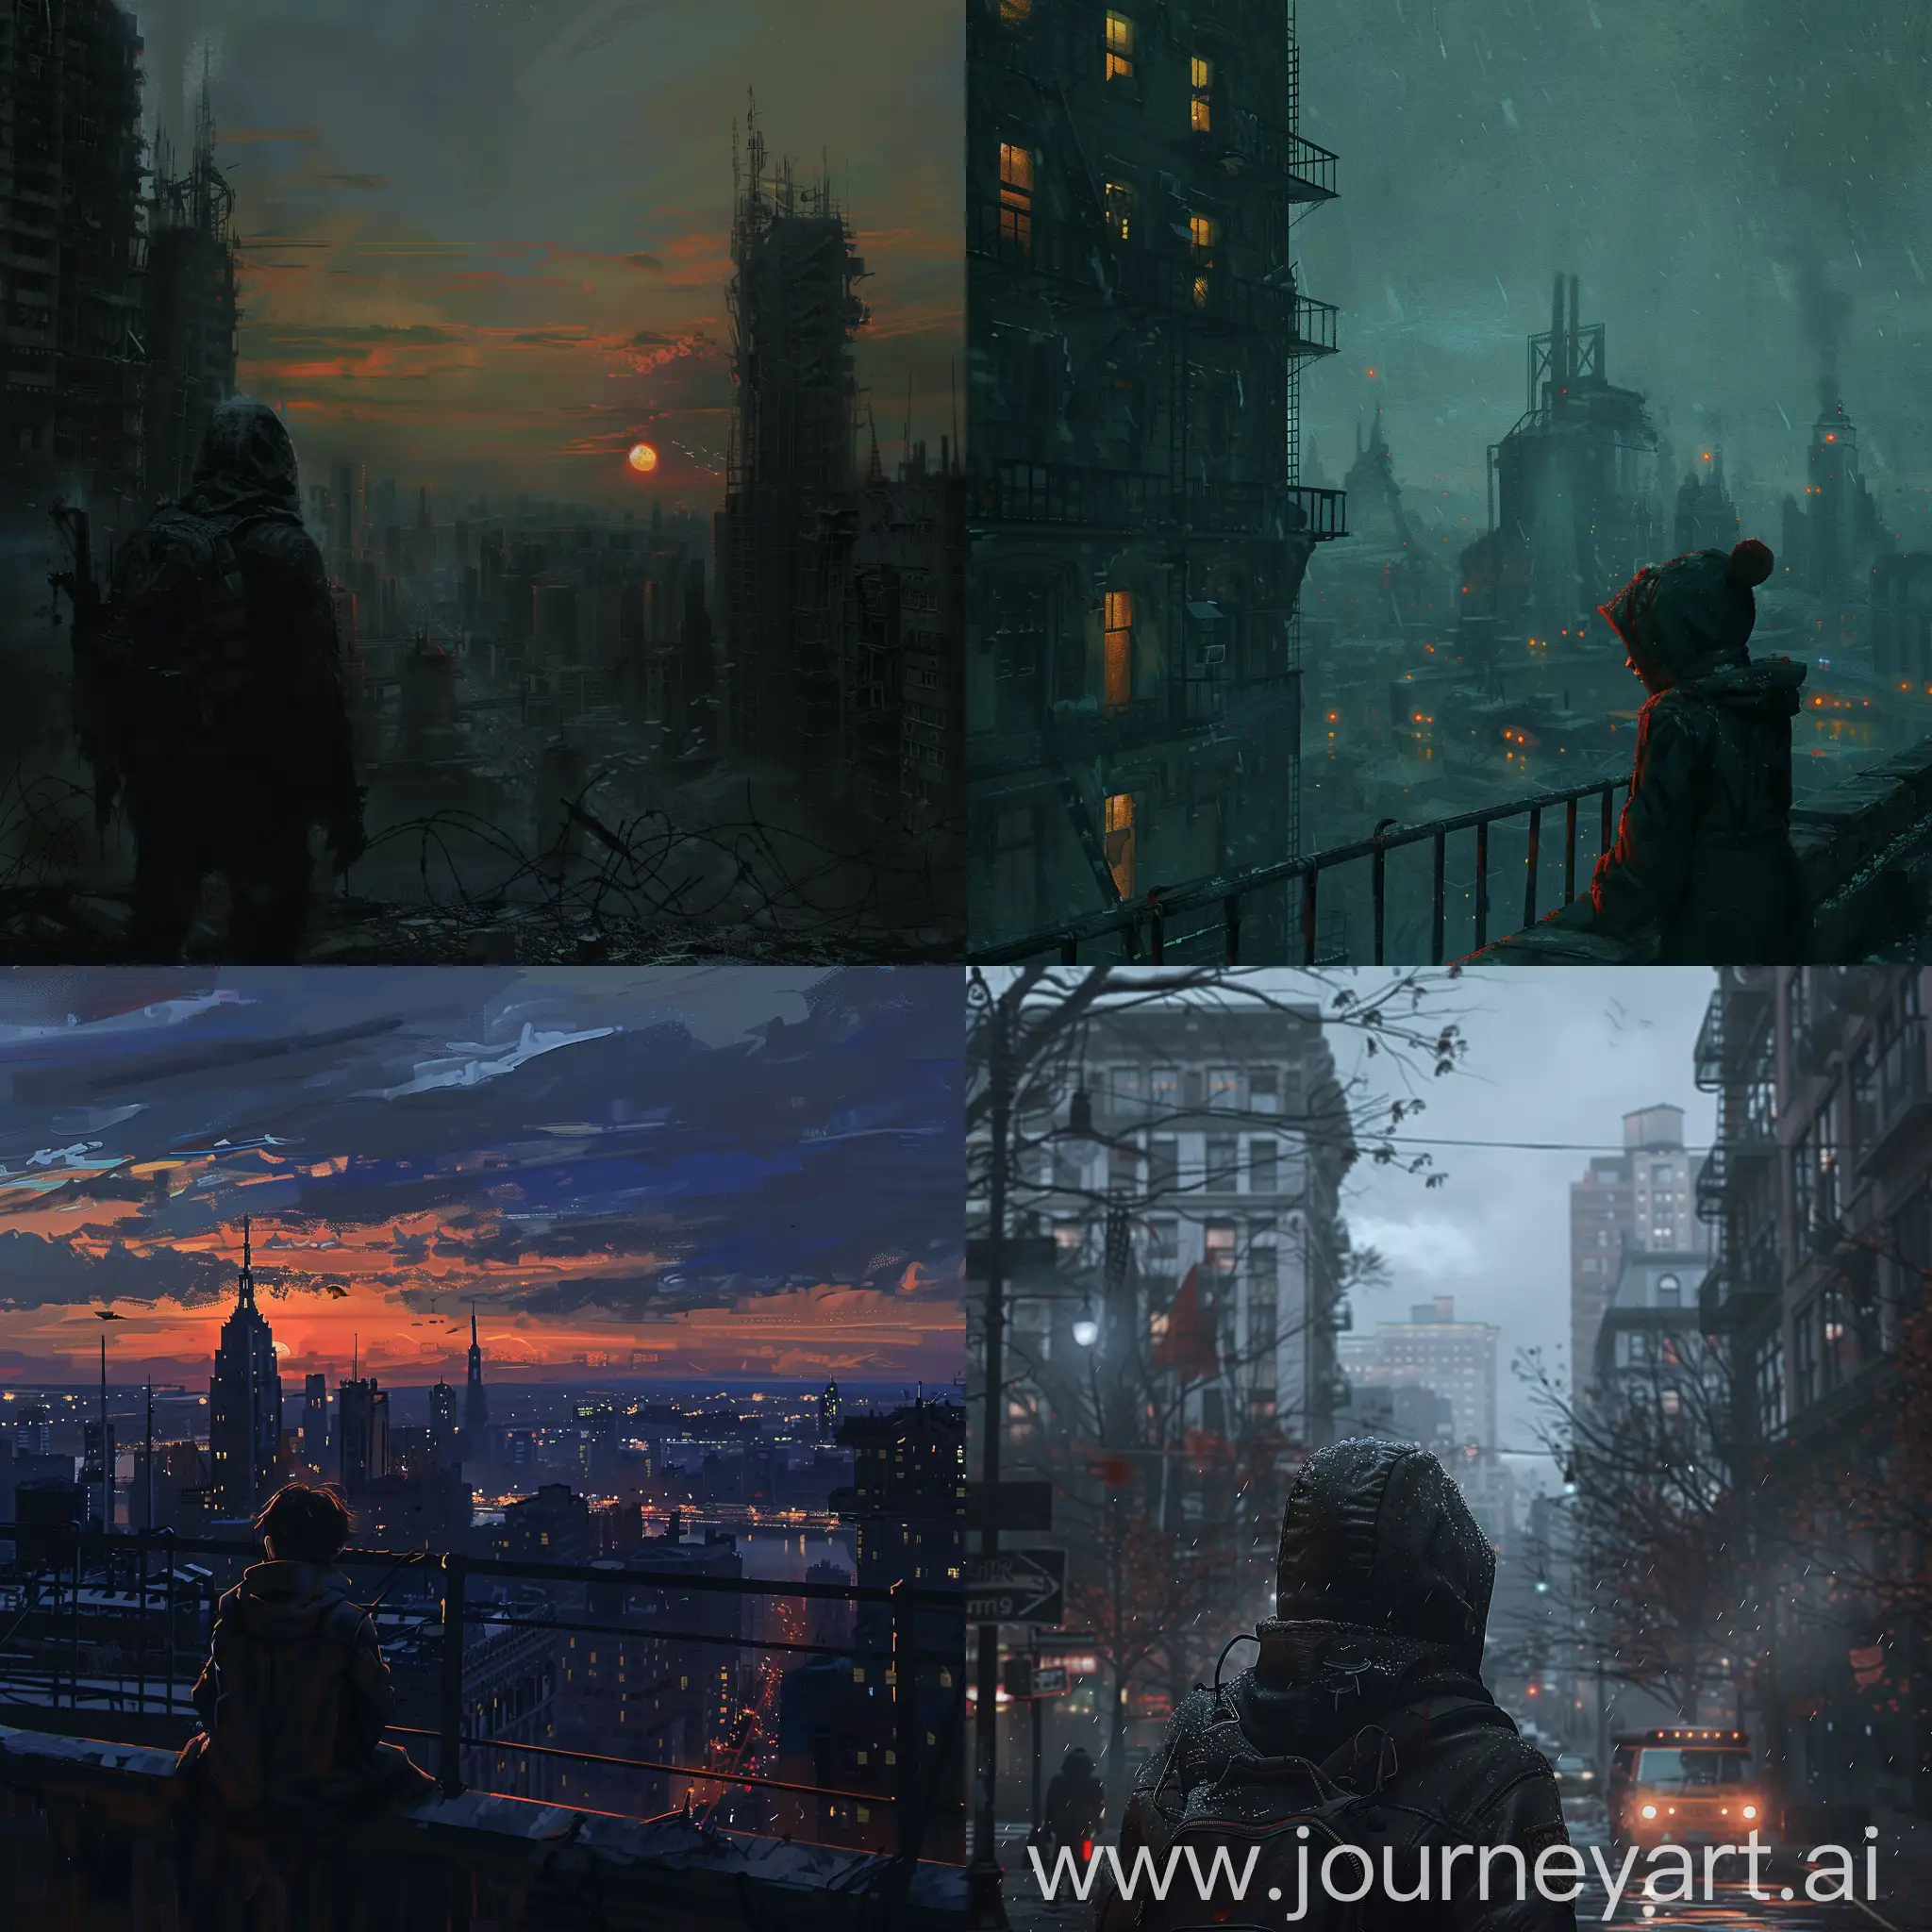 Twilight-Cityscape-with-Melancholic-Character-in-Foreground